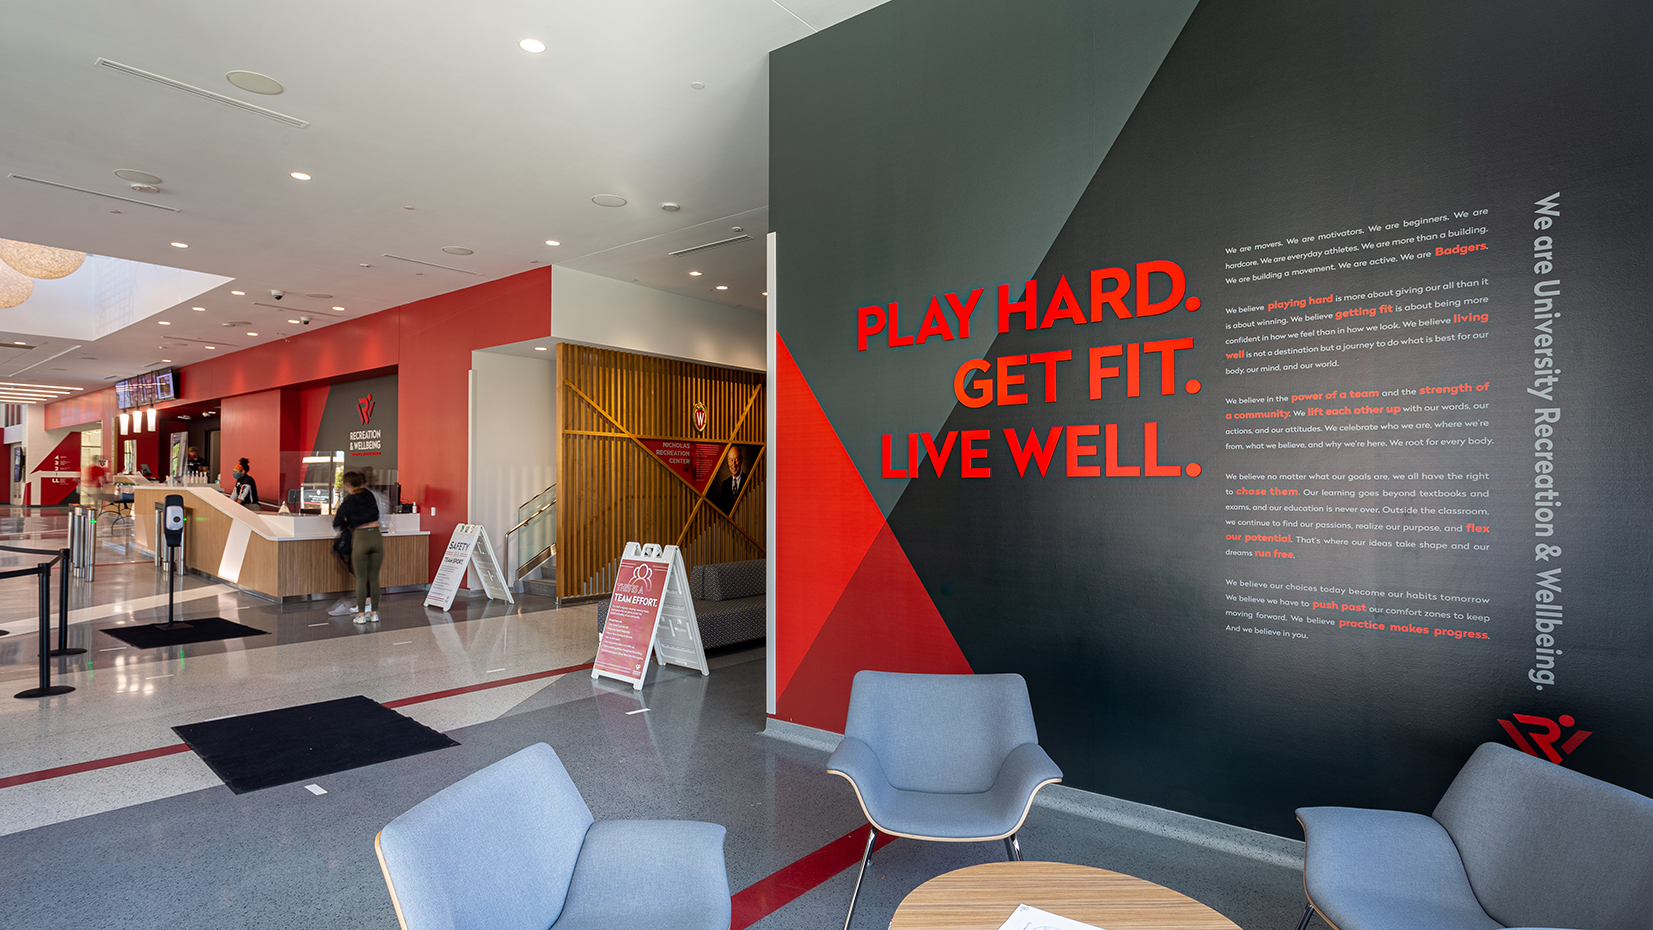 University Of Wisconsin - Recreation & Wellbeing Mission Wall